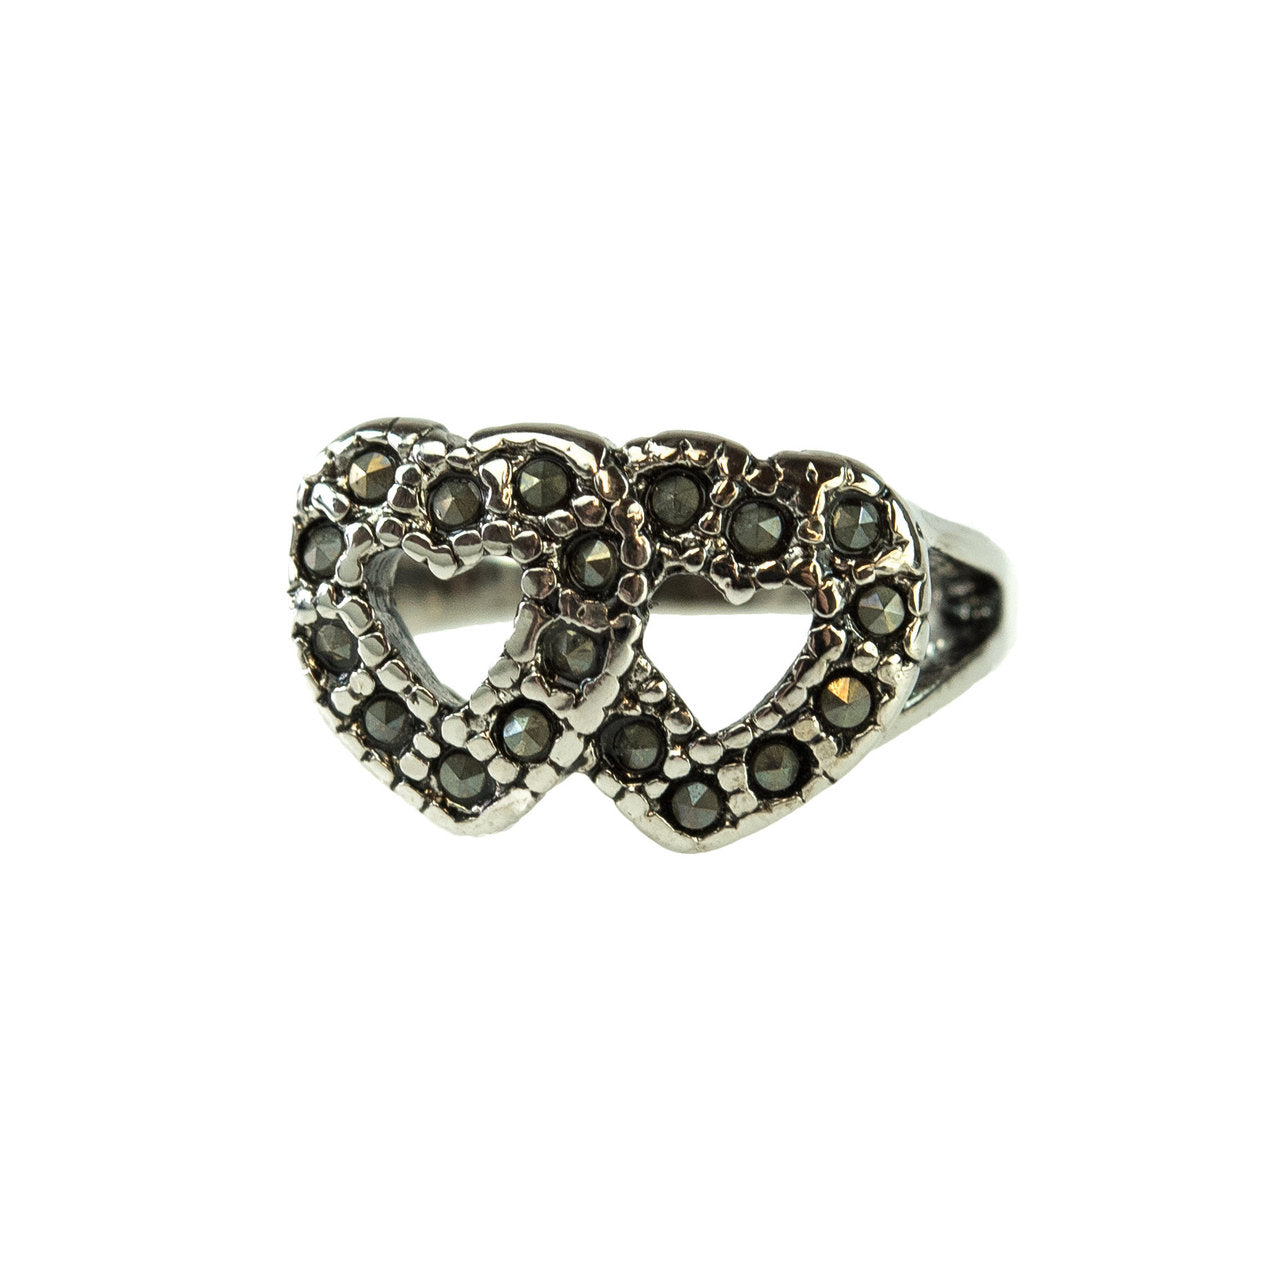 Vintage Ring Genuine Marcasite Double Heart Ring Antique 18k White Gold Silver Antique Womans Jewelry R1758